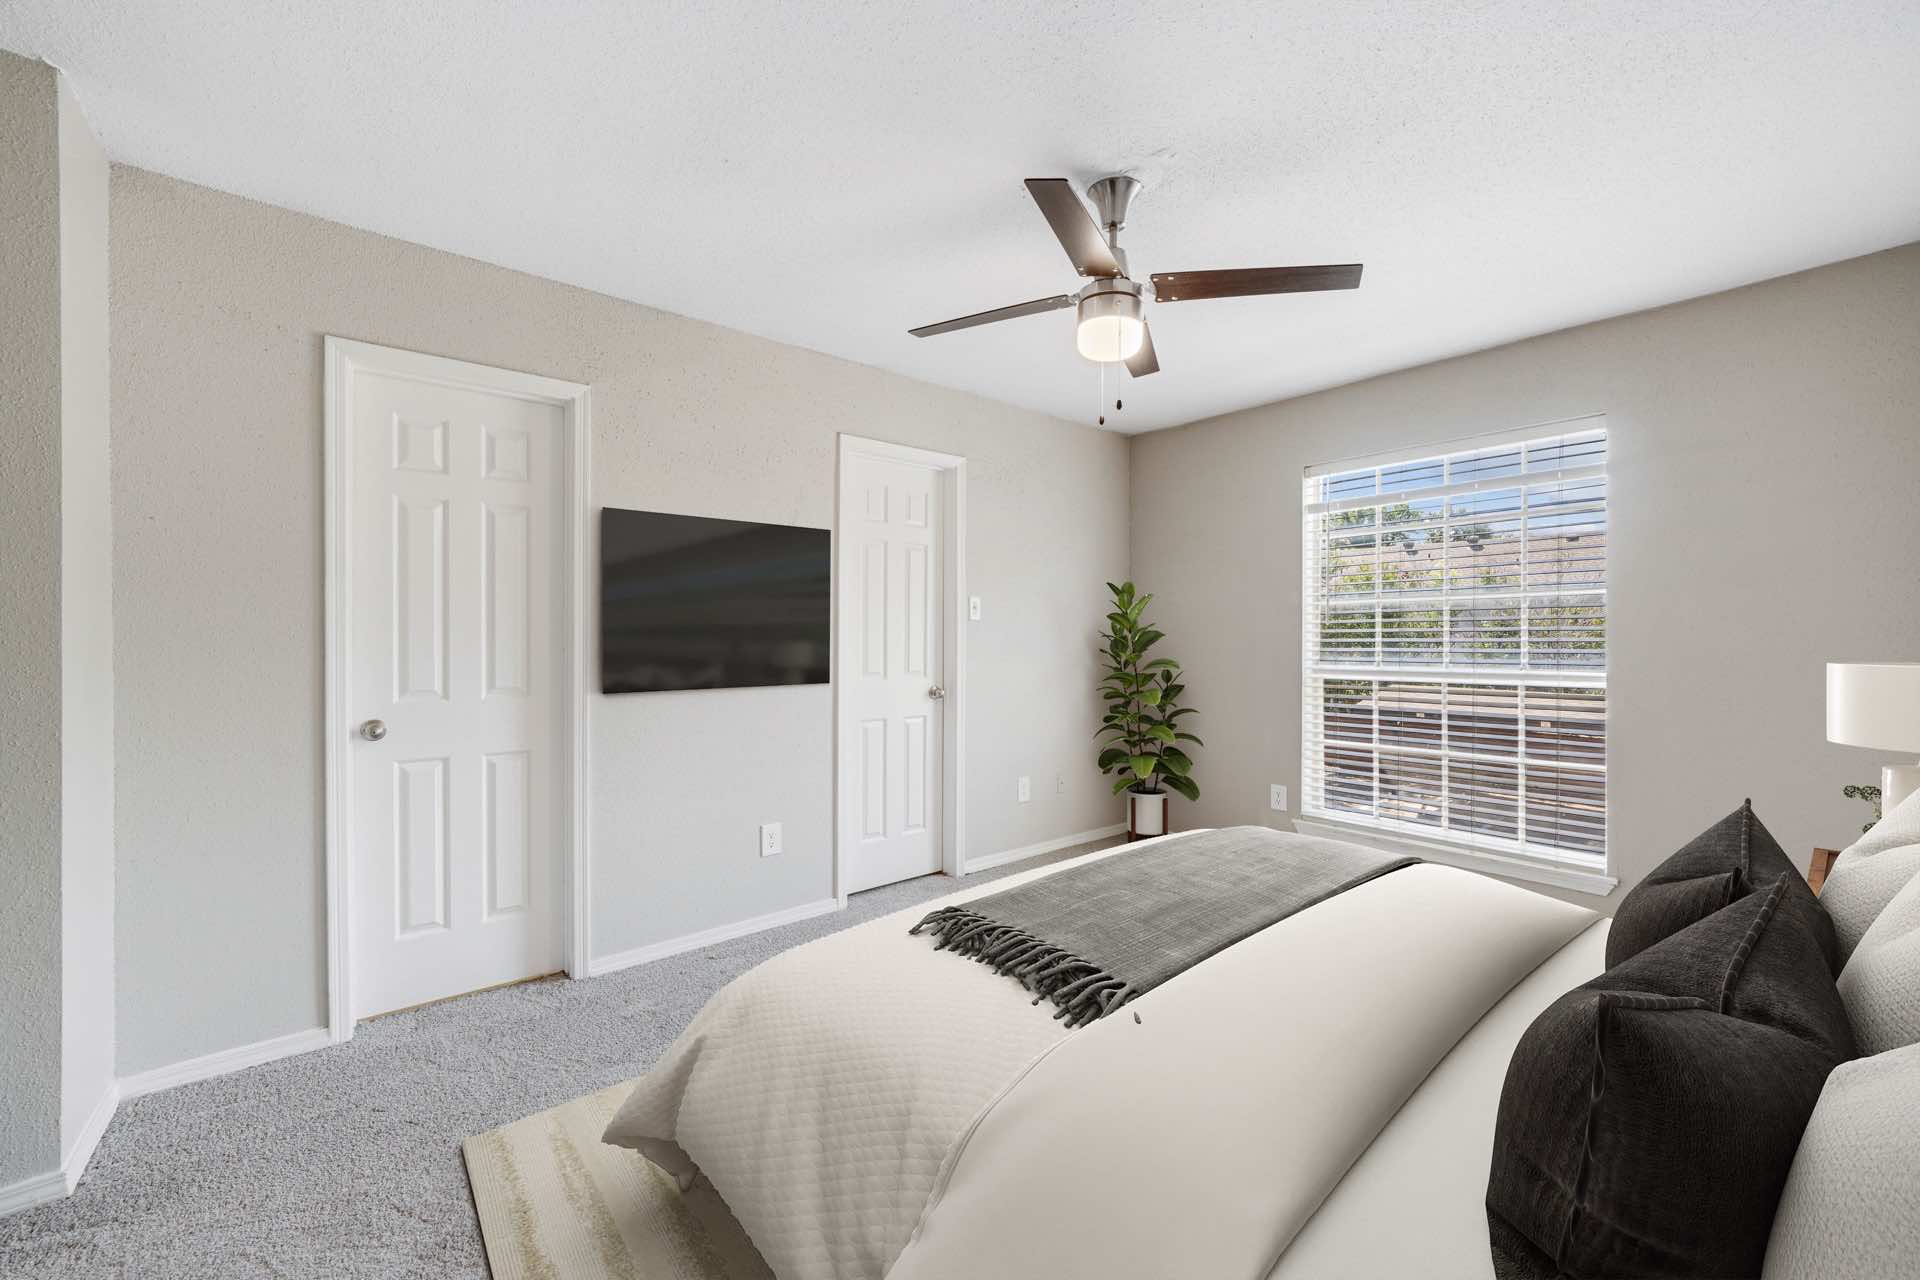 ceiling fan, wall-mounted tv, and large window in bedroom